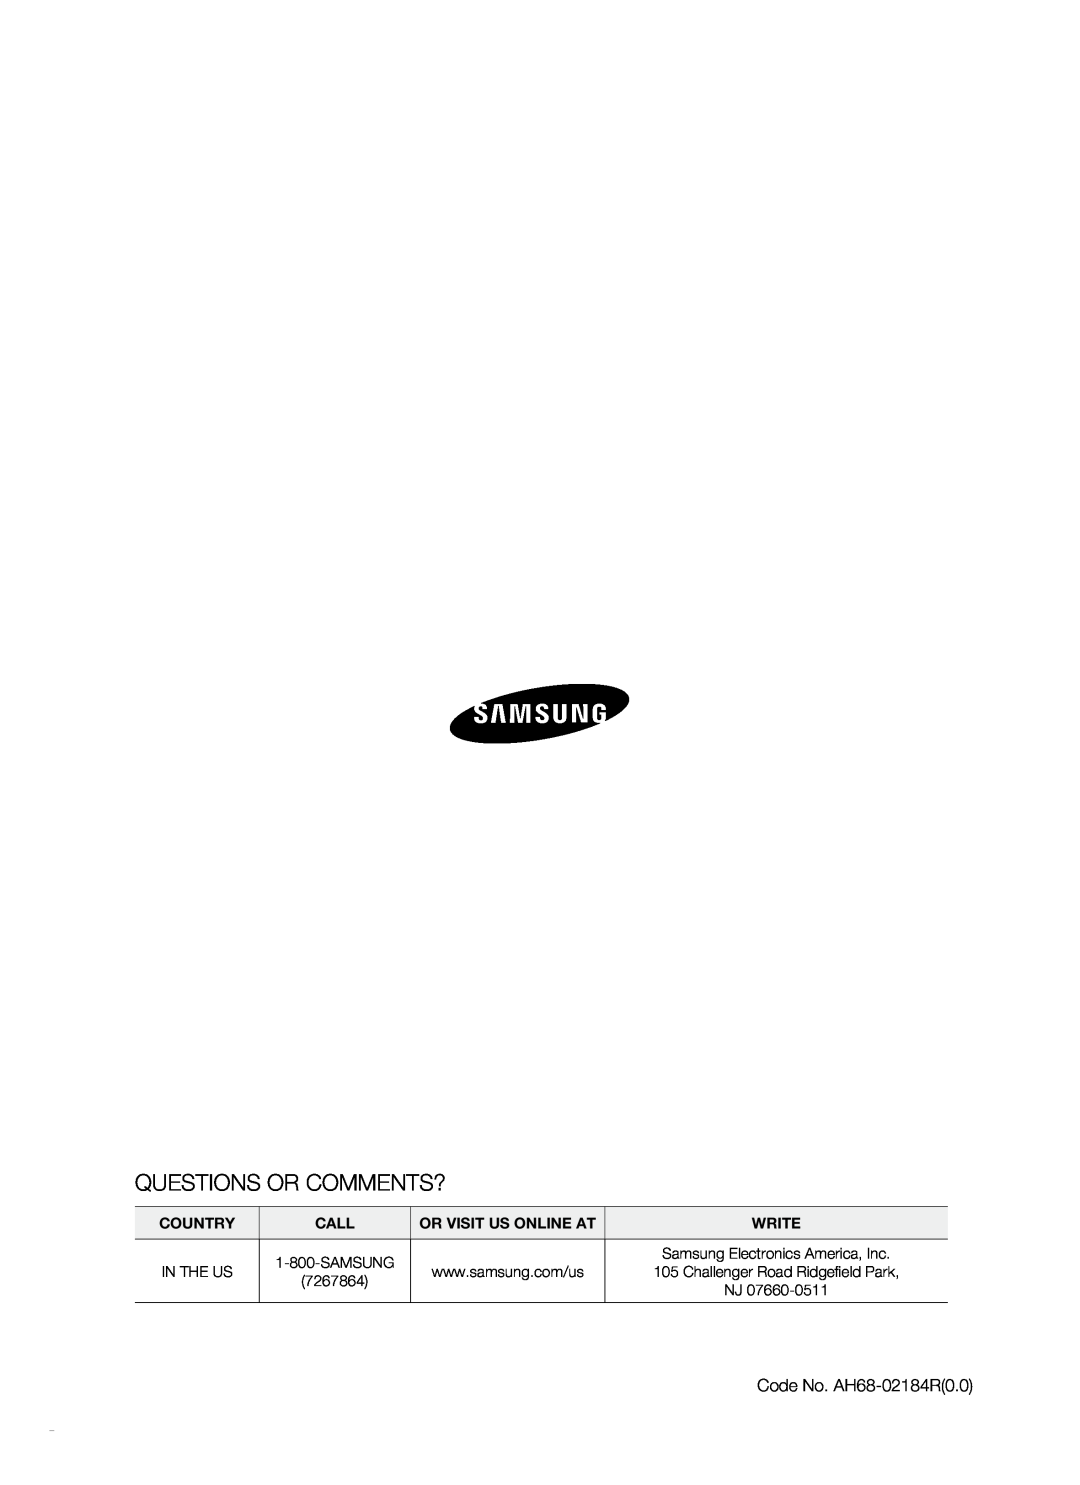 Samsung HT-WS1R, HT-SB1R, HT-SB1G Questions Or Comments?, Country, Call, Or Visit Us Online At, Write, In The Us, 7267864 